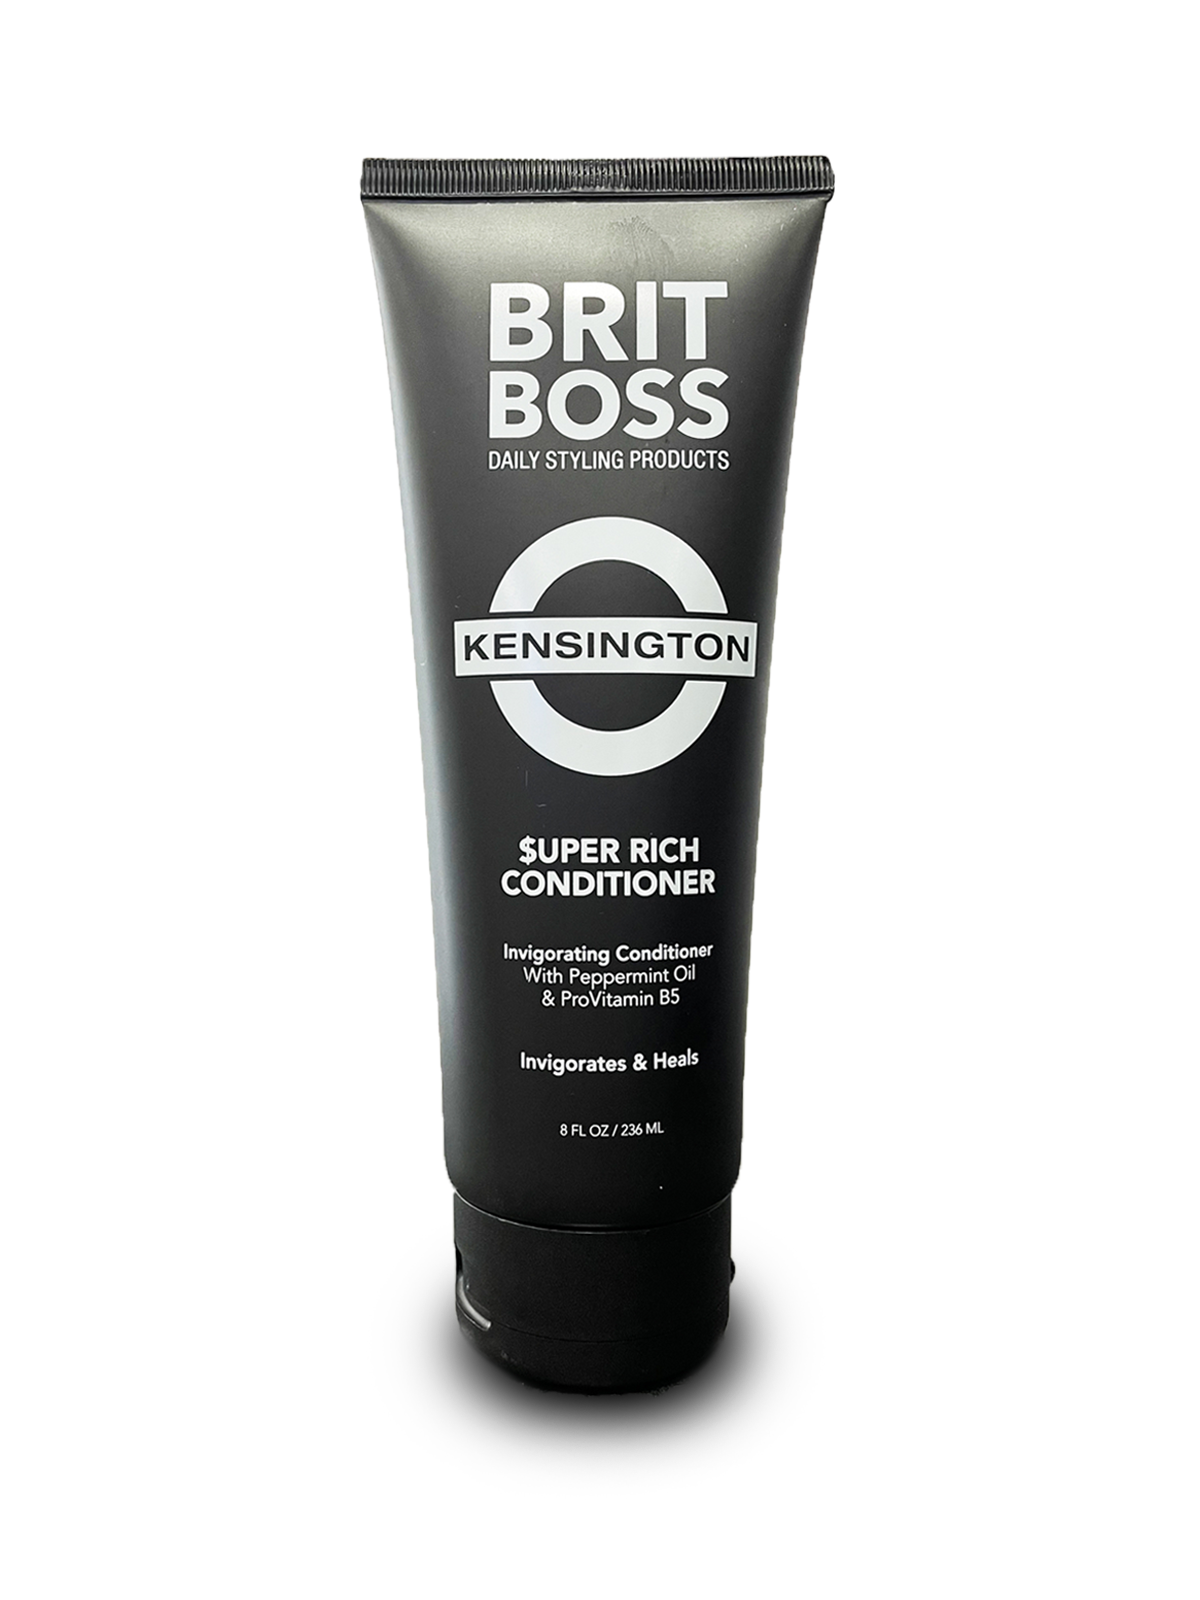 Brit Boss Kensington Conditioner with Peppermint Oil